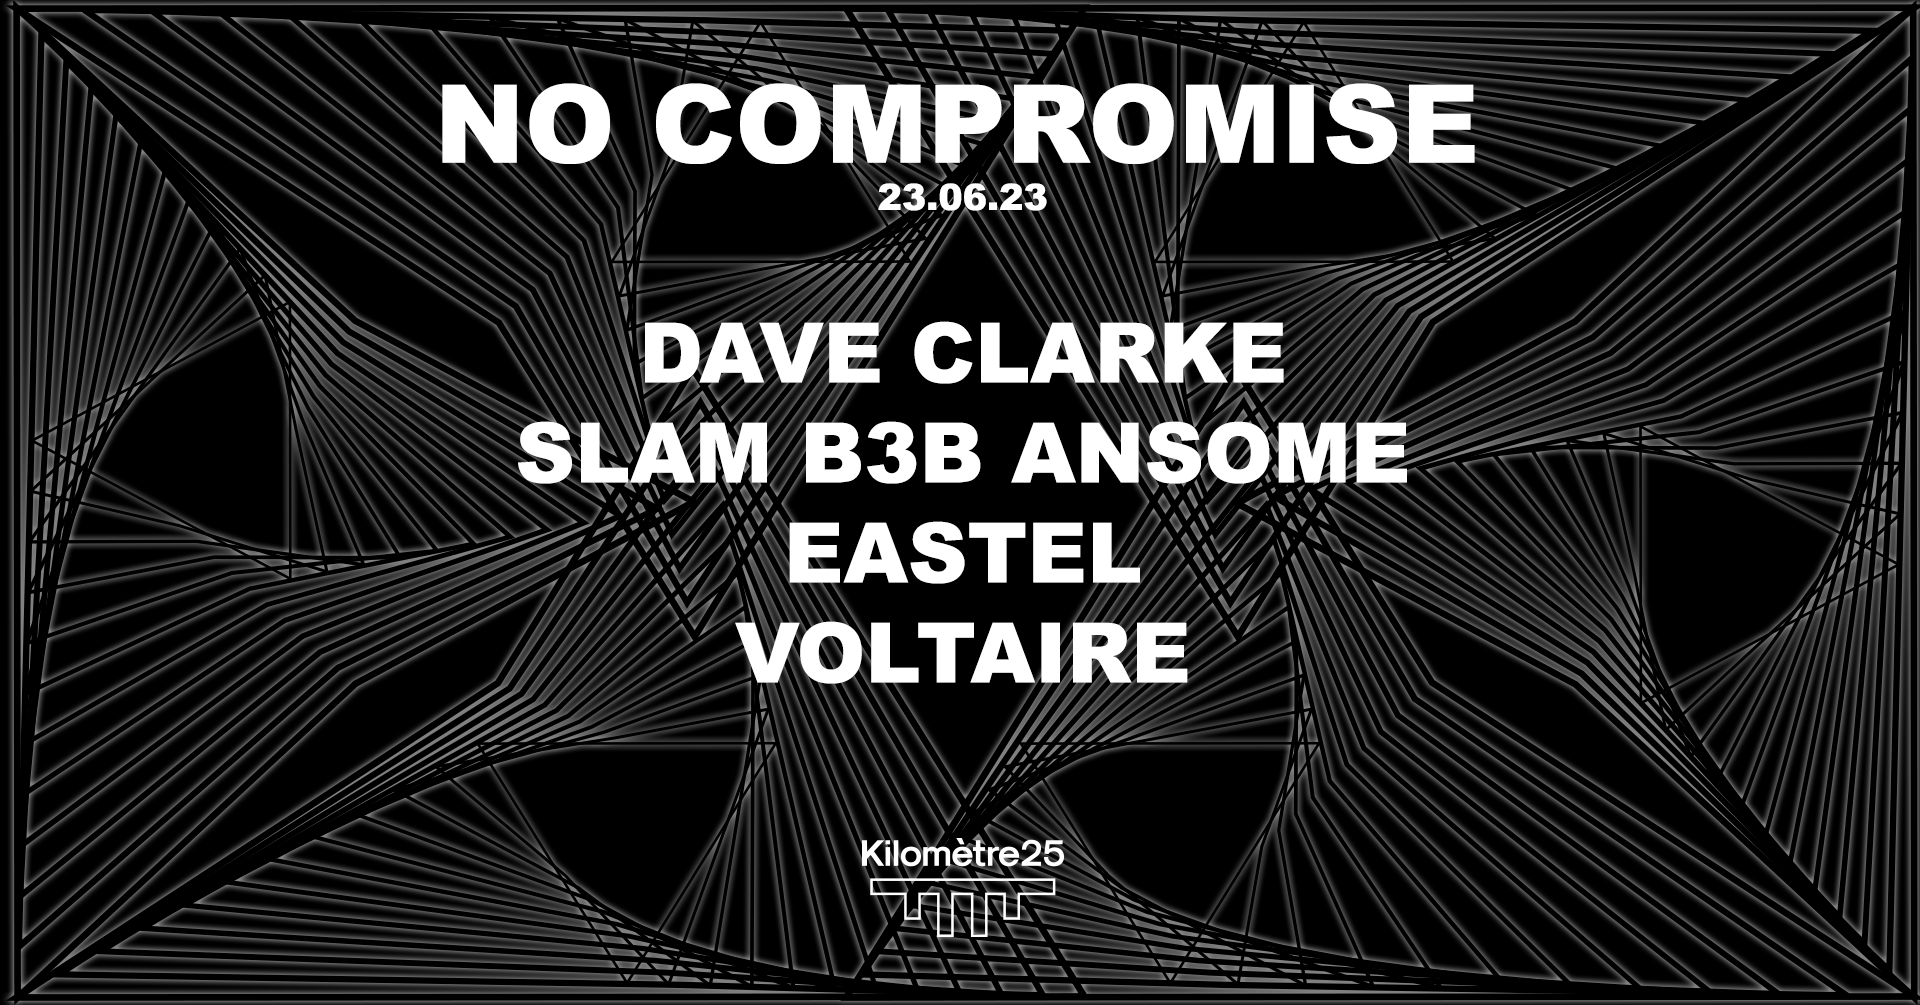 NO COMPROMISES: Dave Clarke, Slam B3B Ansome AND MORE - フライヤー表